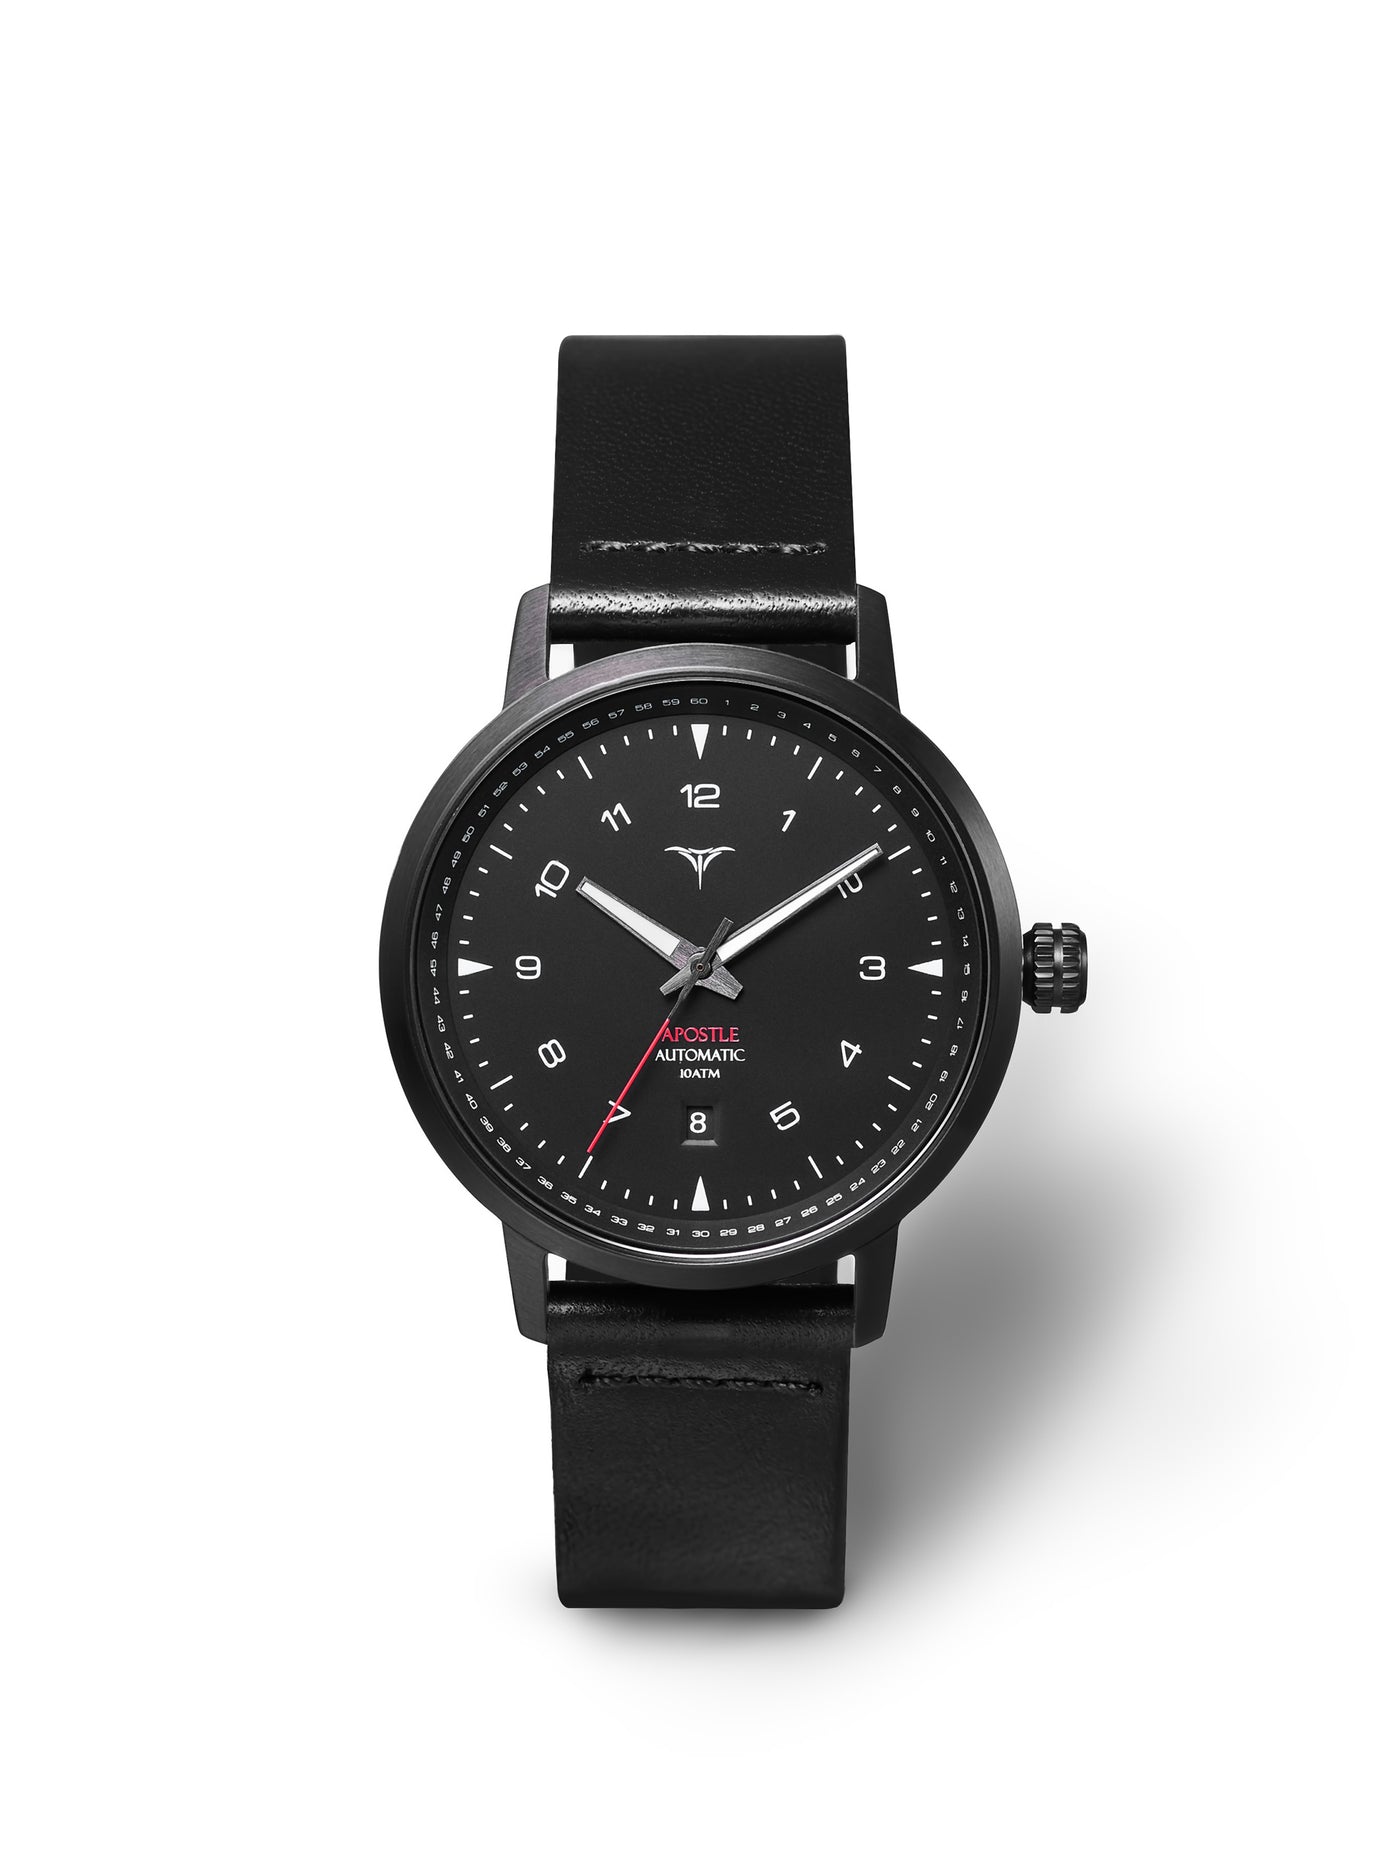 Black dial automatic watches V-Apostle with Black Horween Leather Straps | Vstelle Watch